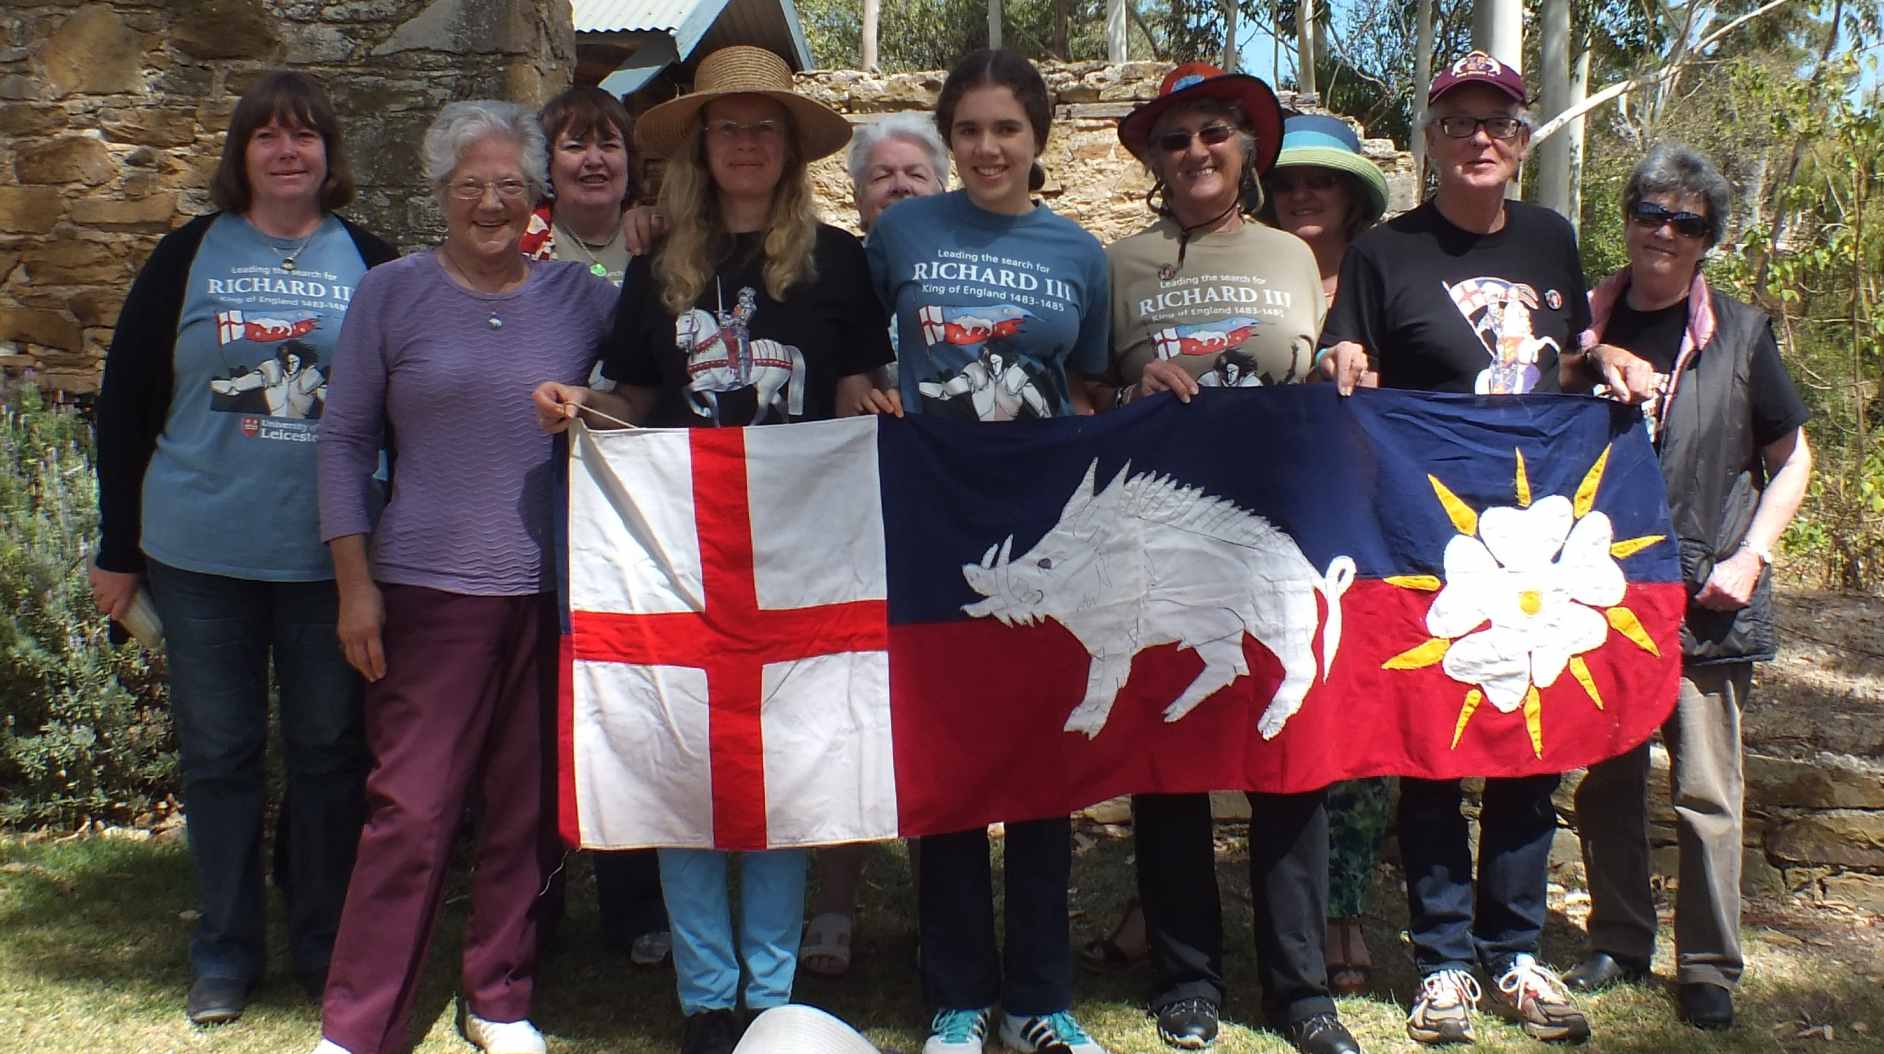 Battle of Bosworth winery picnic march 2015 the branch